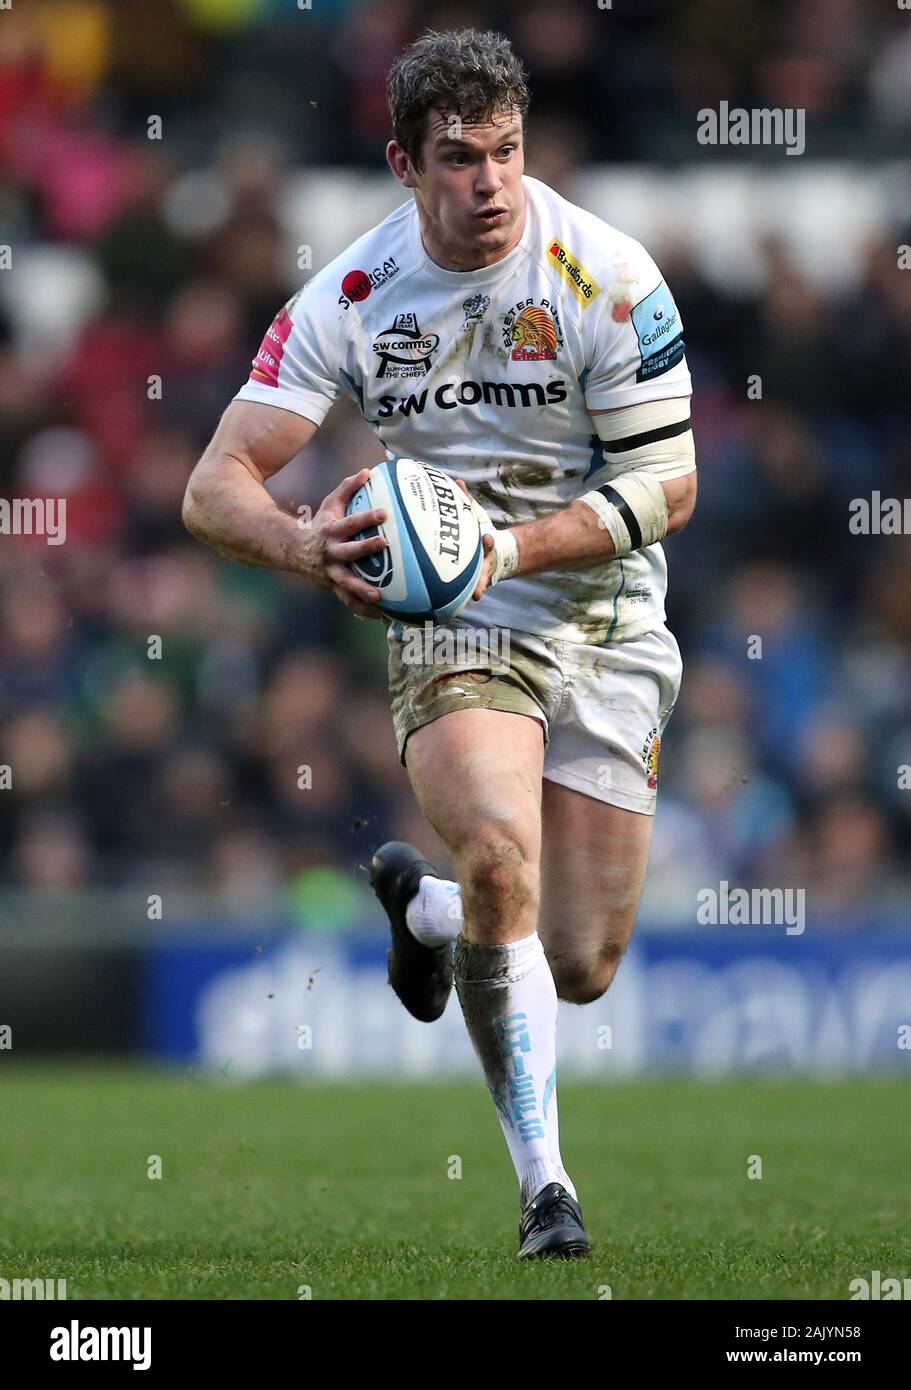 Exeter Chief's Ian Whitten during the Gallagher Premiership match at Welford Road, Leicester. PA Photo. Picture date: Saturday December 21, 2019. See PA story RUGBYU Leicester. Photo credit should read: David Davies/PA Wire. Stock Photo